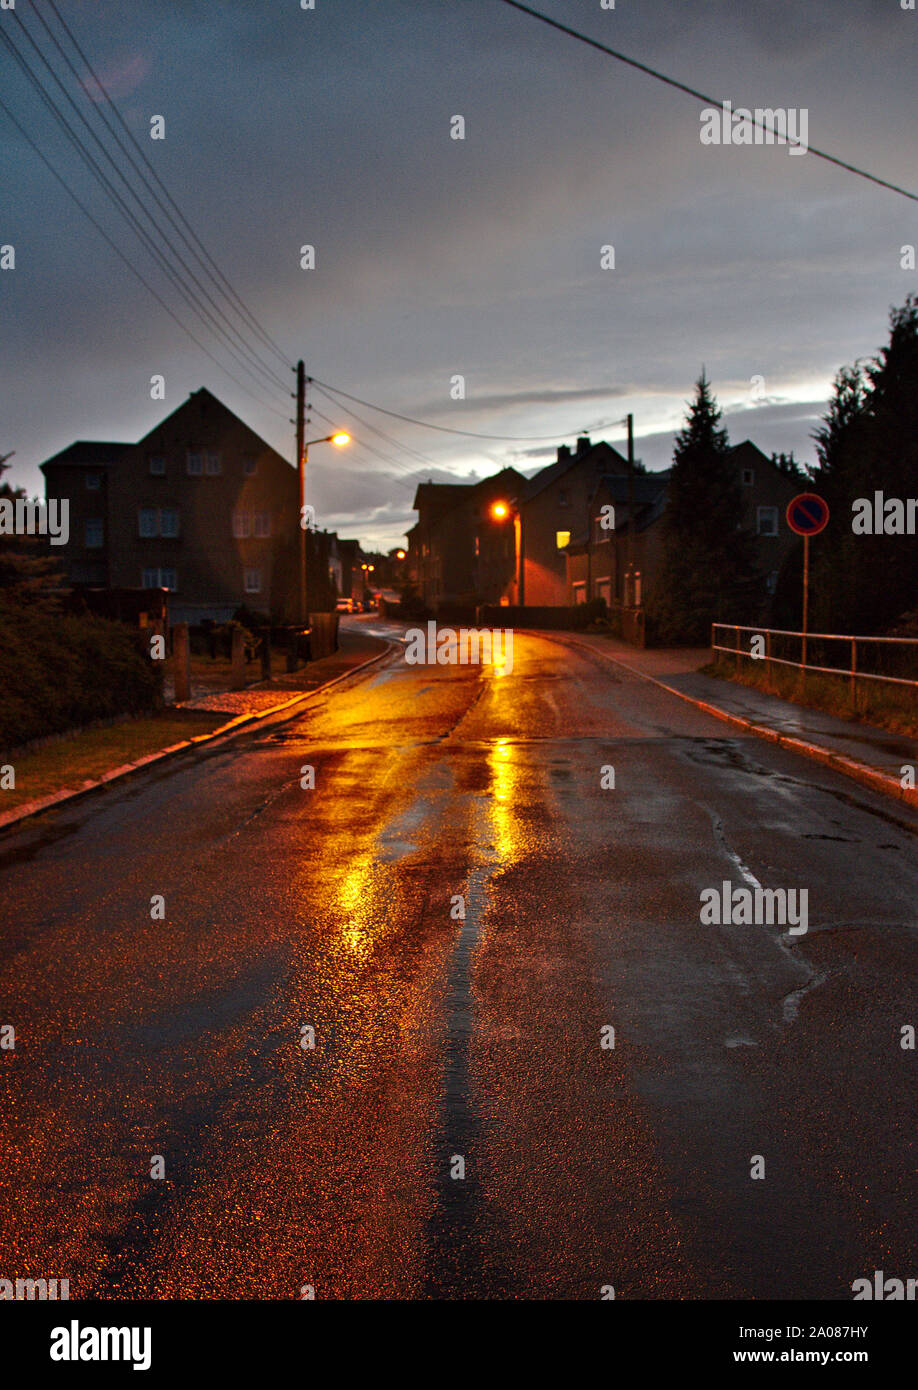 wet street reflecting lights of the streetlamps Stock Photo